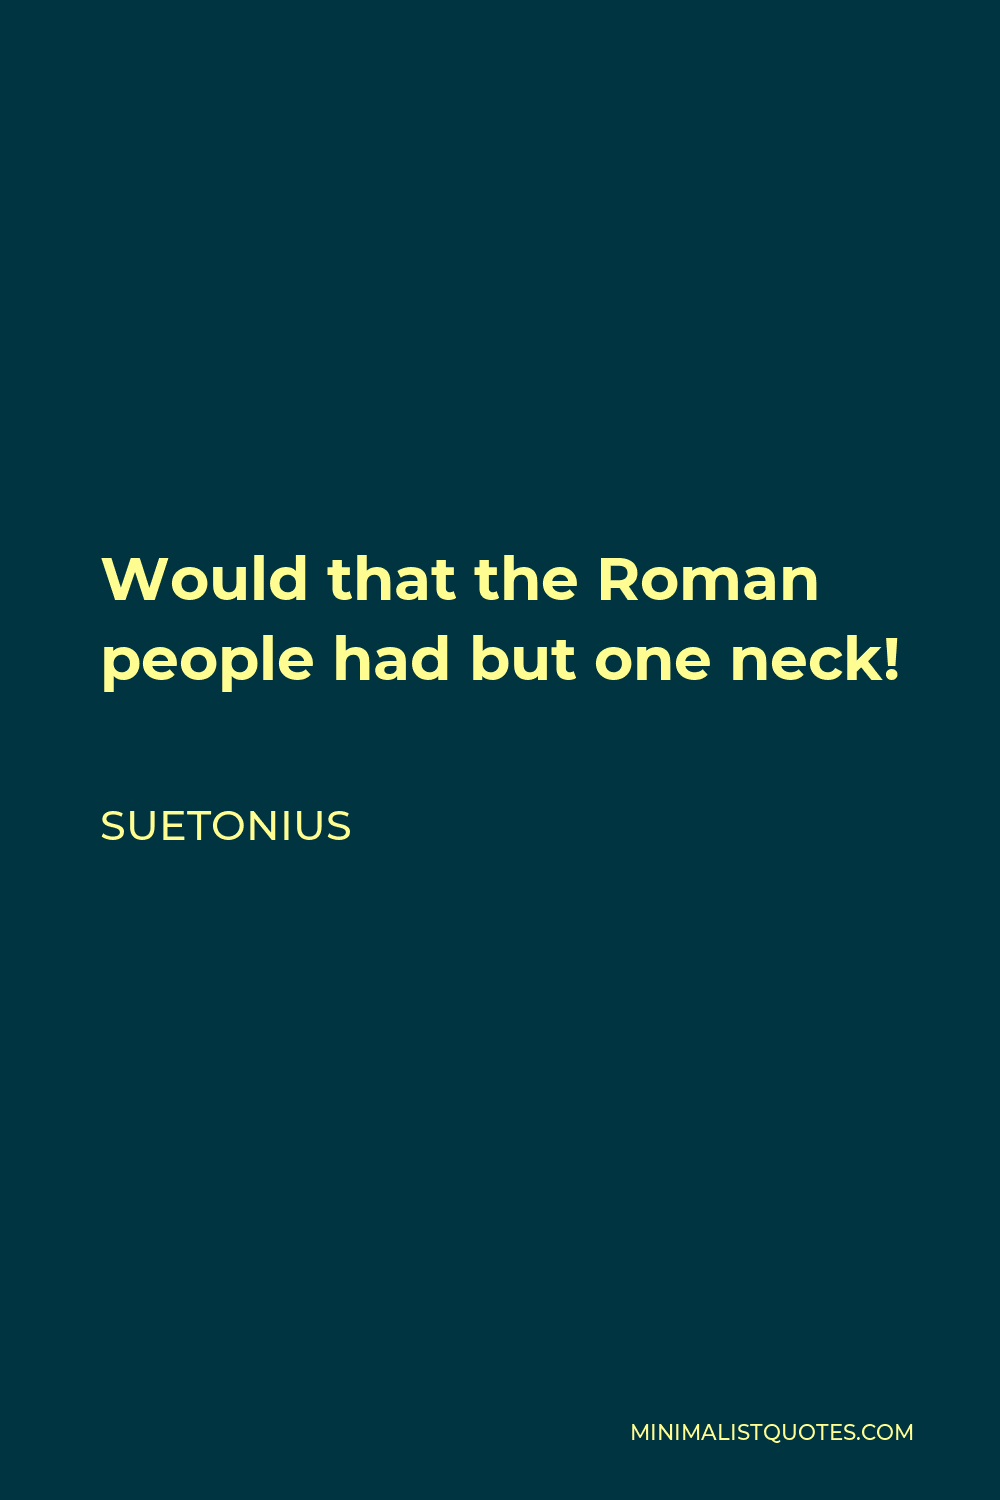 Suetonius Quote - Would that the Roman people had but one neck!